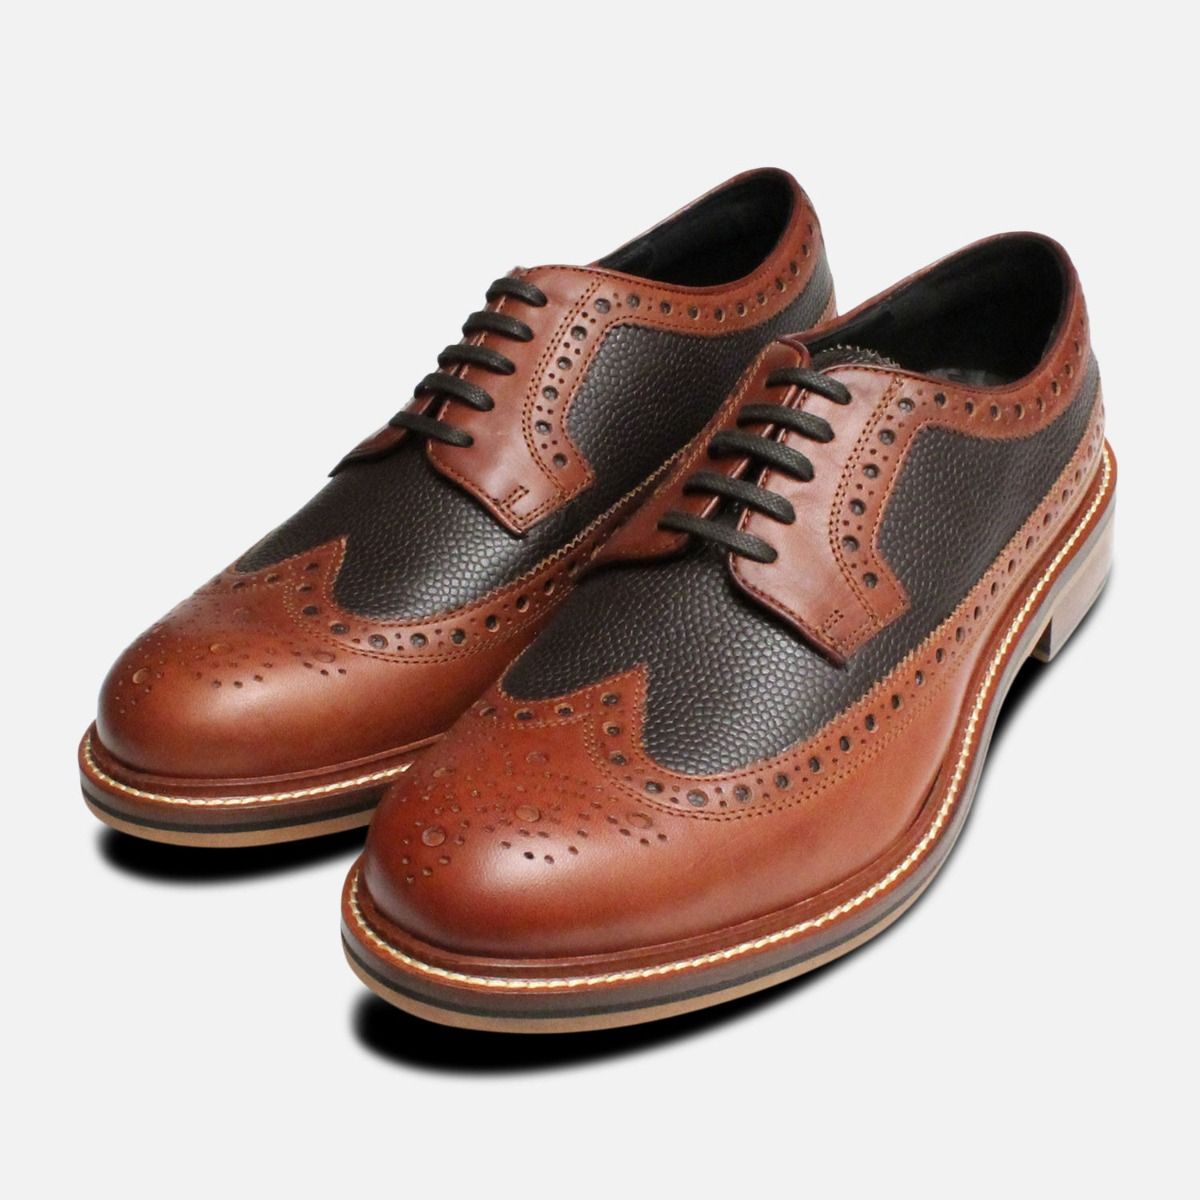 Tan Wingtip Two Tone Brogues by Thomas Partridge